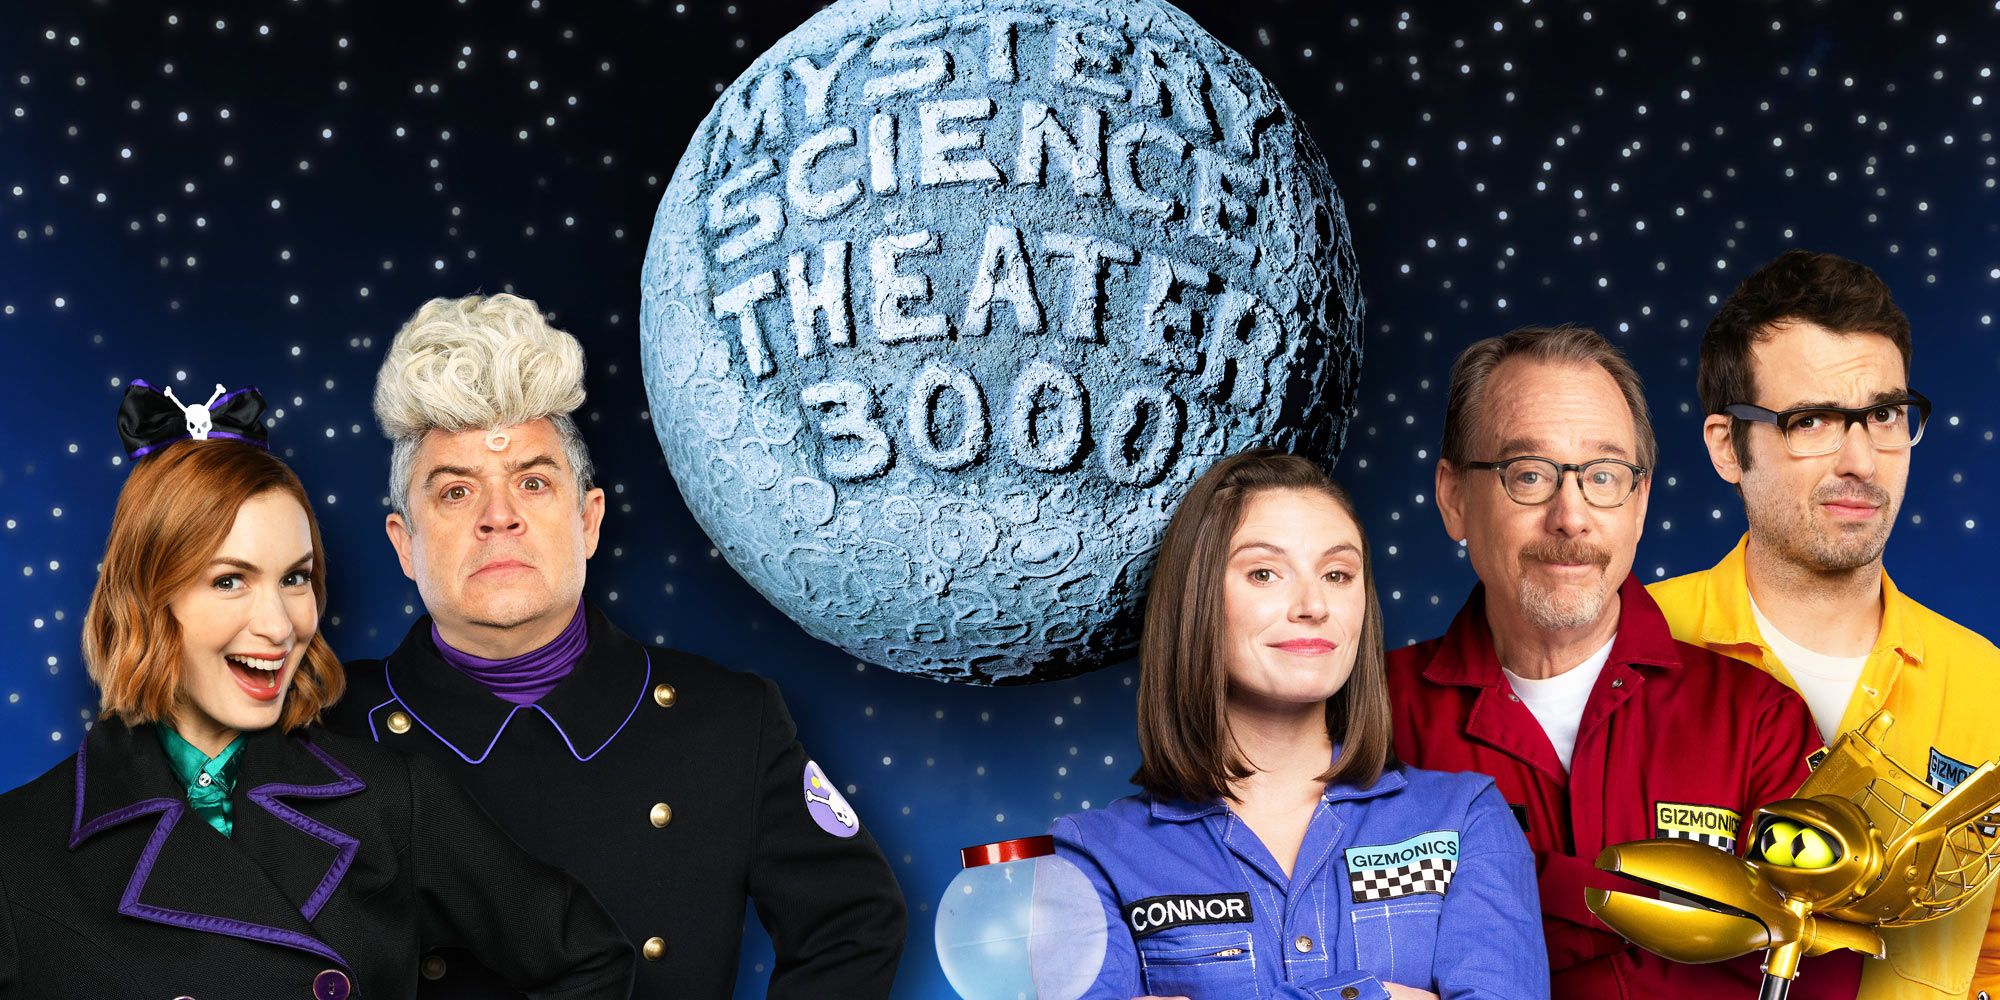 mystery science theater 3,000 trailer